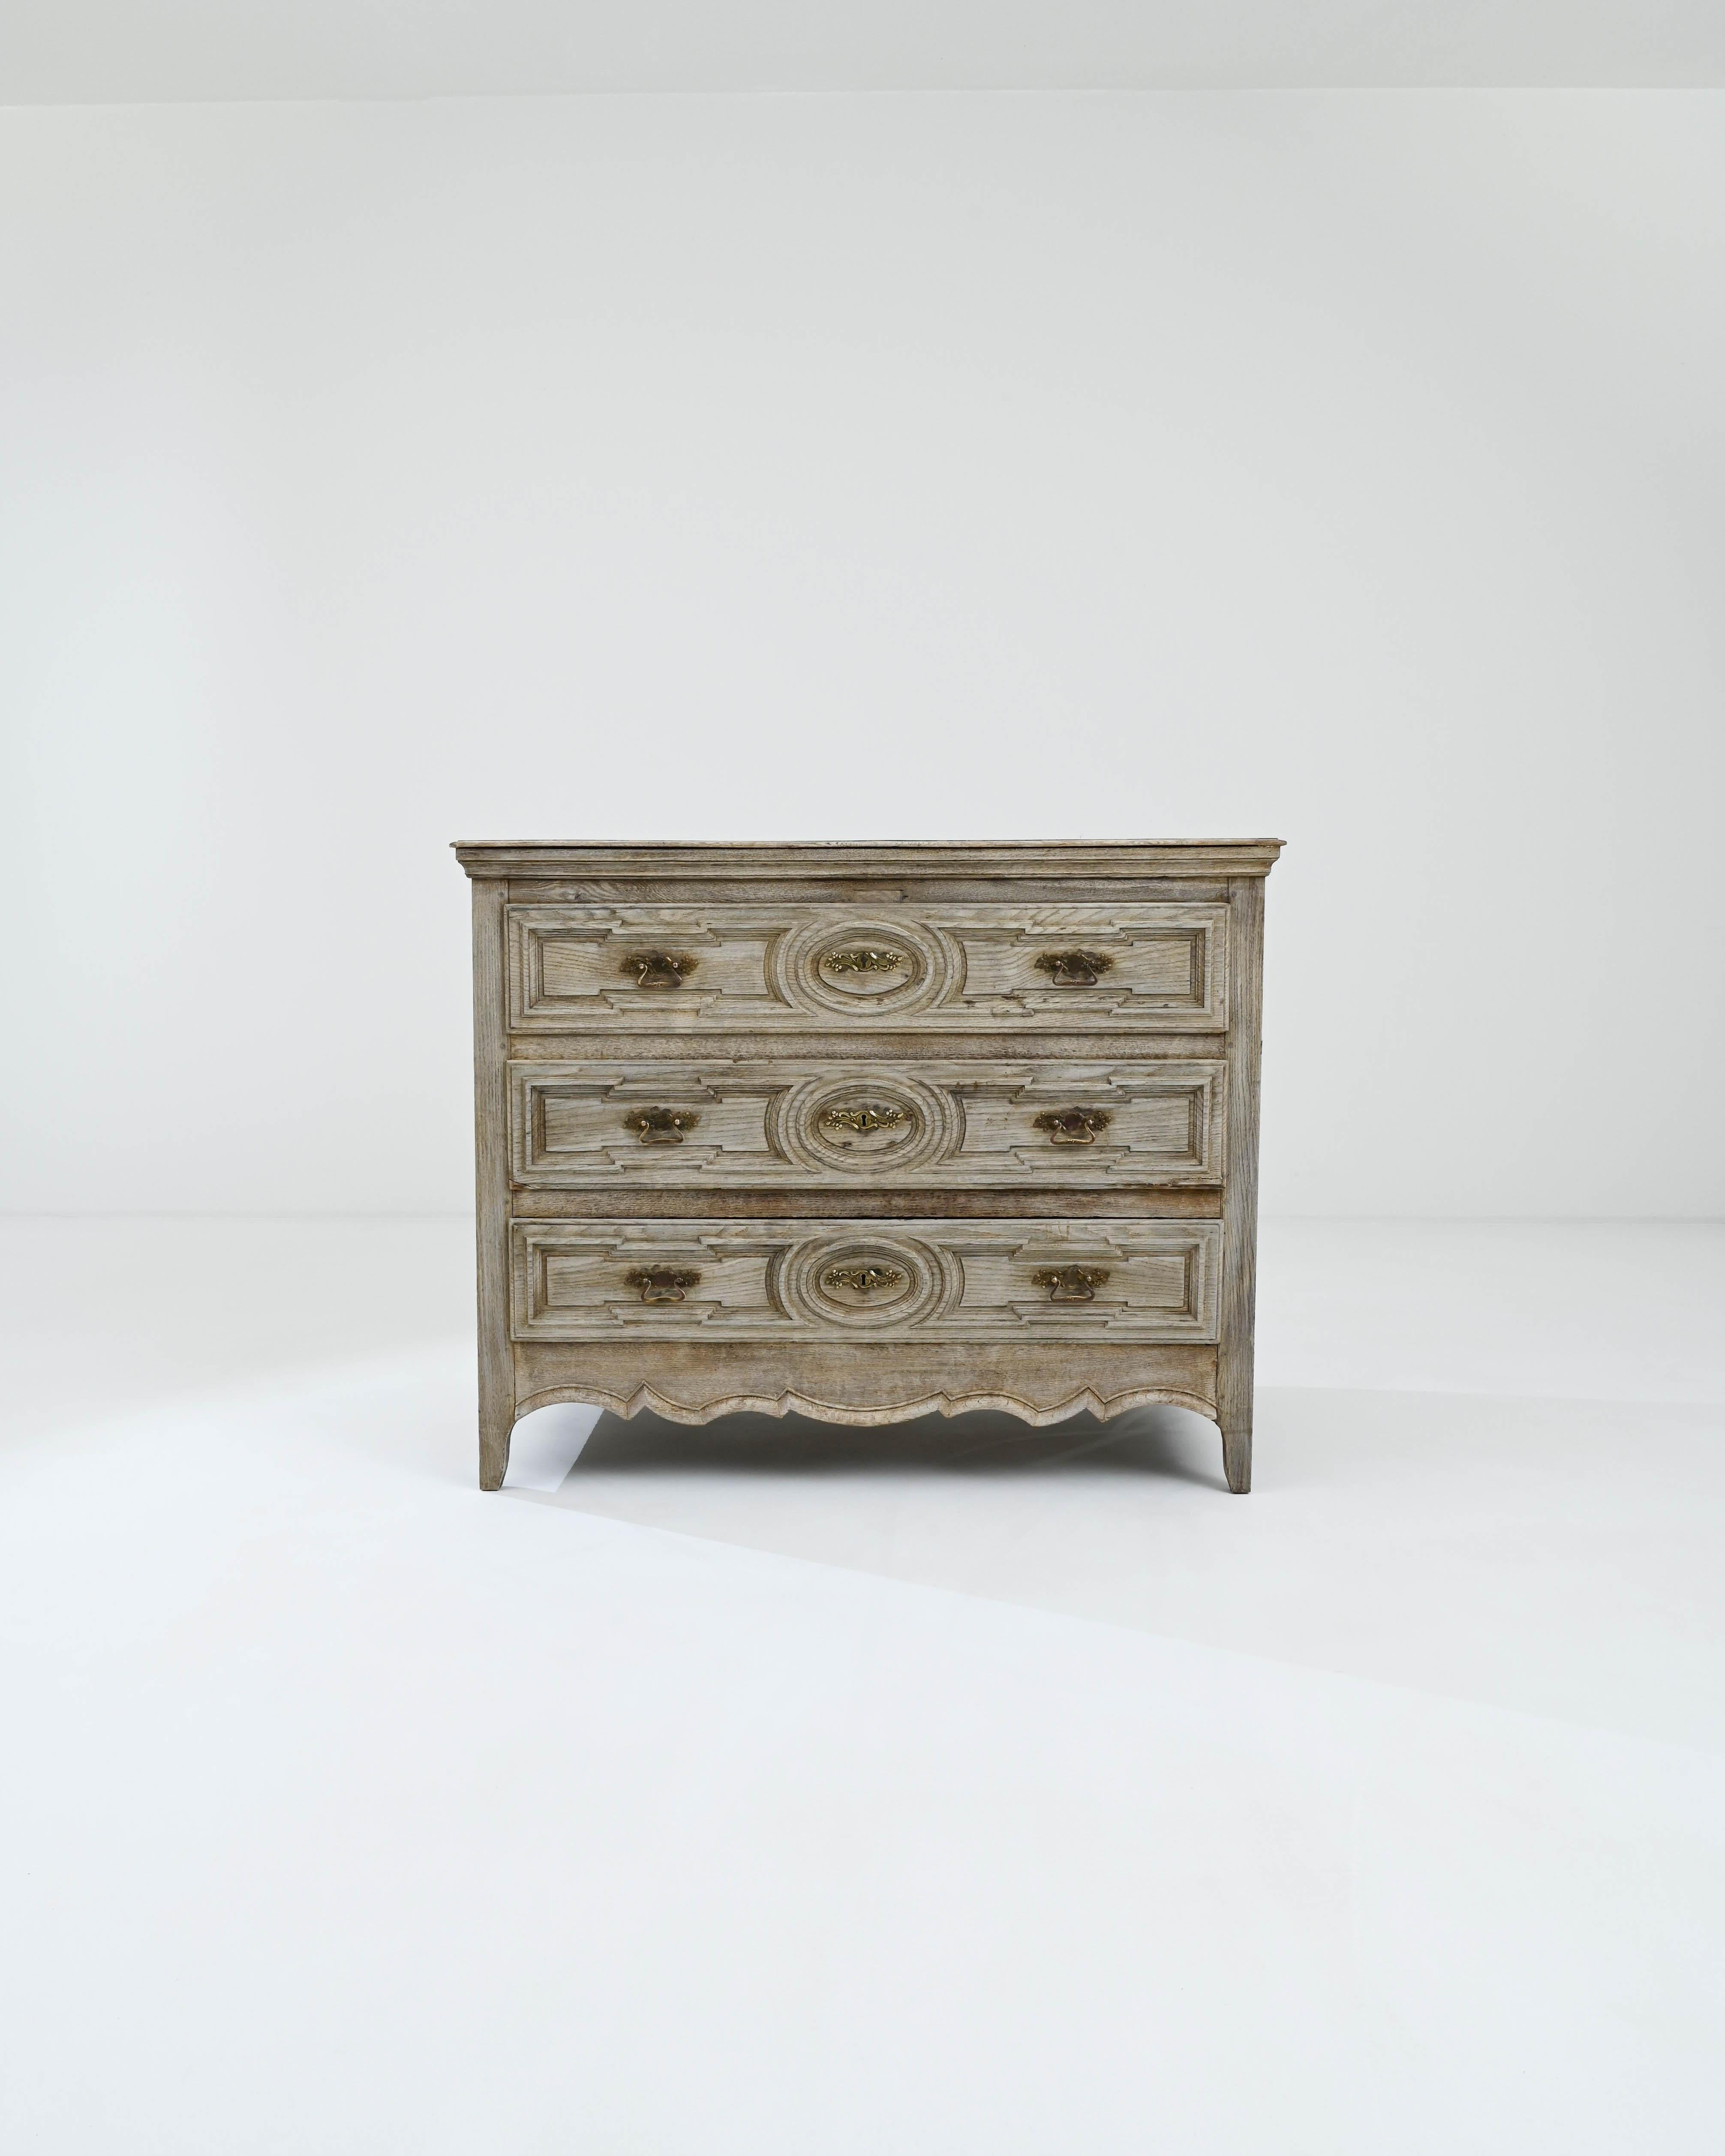 A wooden chest of drawers created in 19th century France. Composed with a dignified aura, this classically beautiful set of drawers radiates calm, elegance, and thoughtful design. Elaborately sculpted drawer fronts and artfully sculpted aprons,